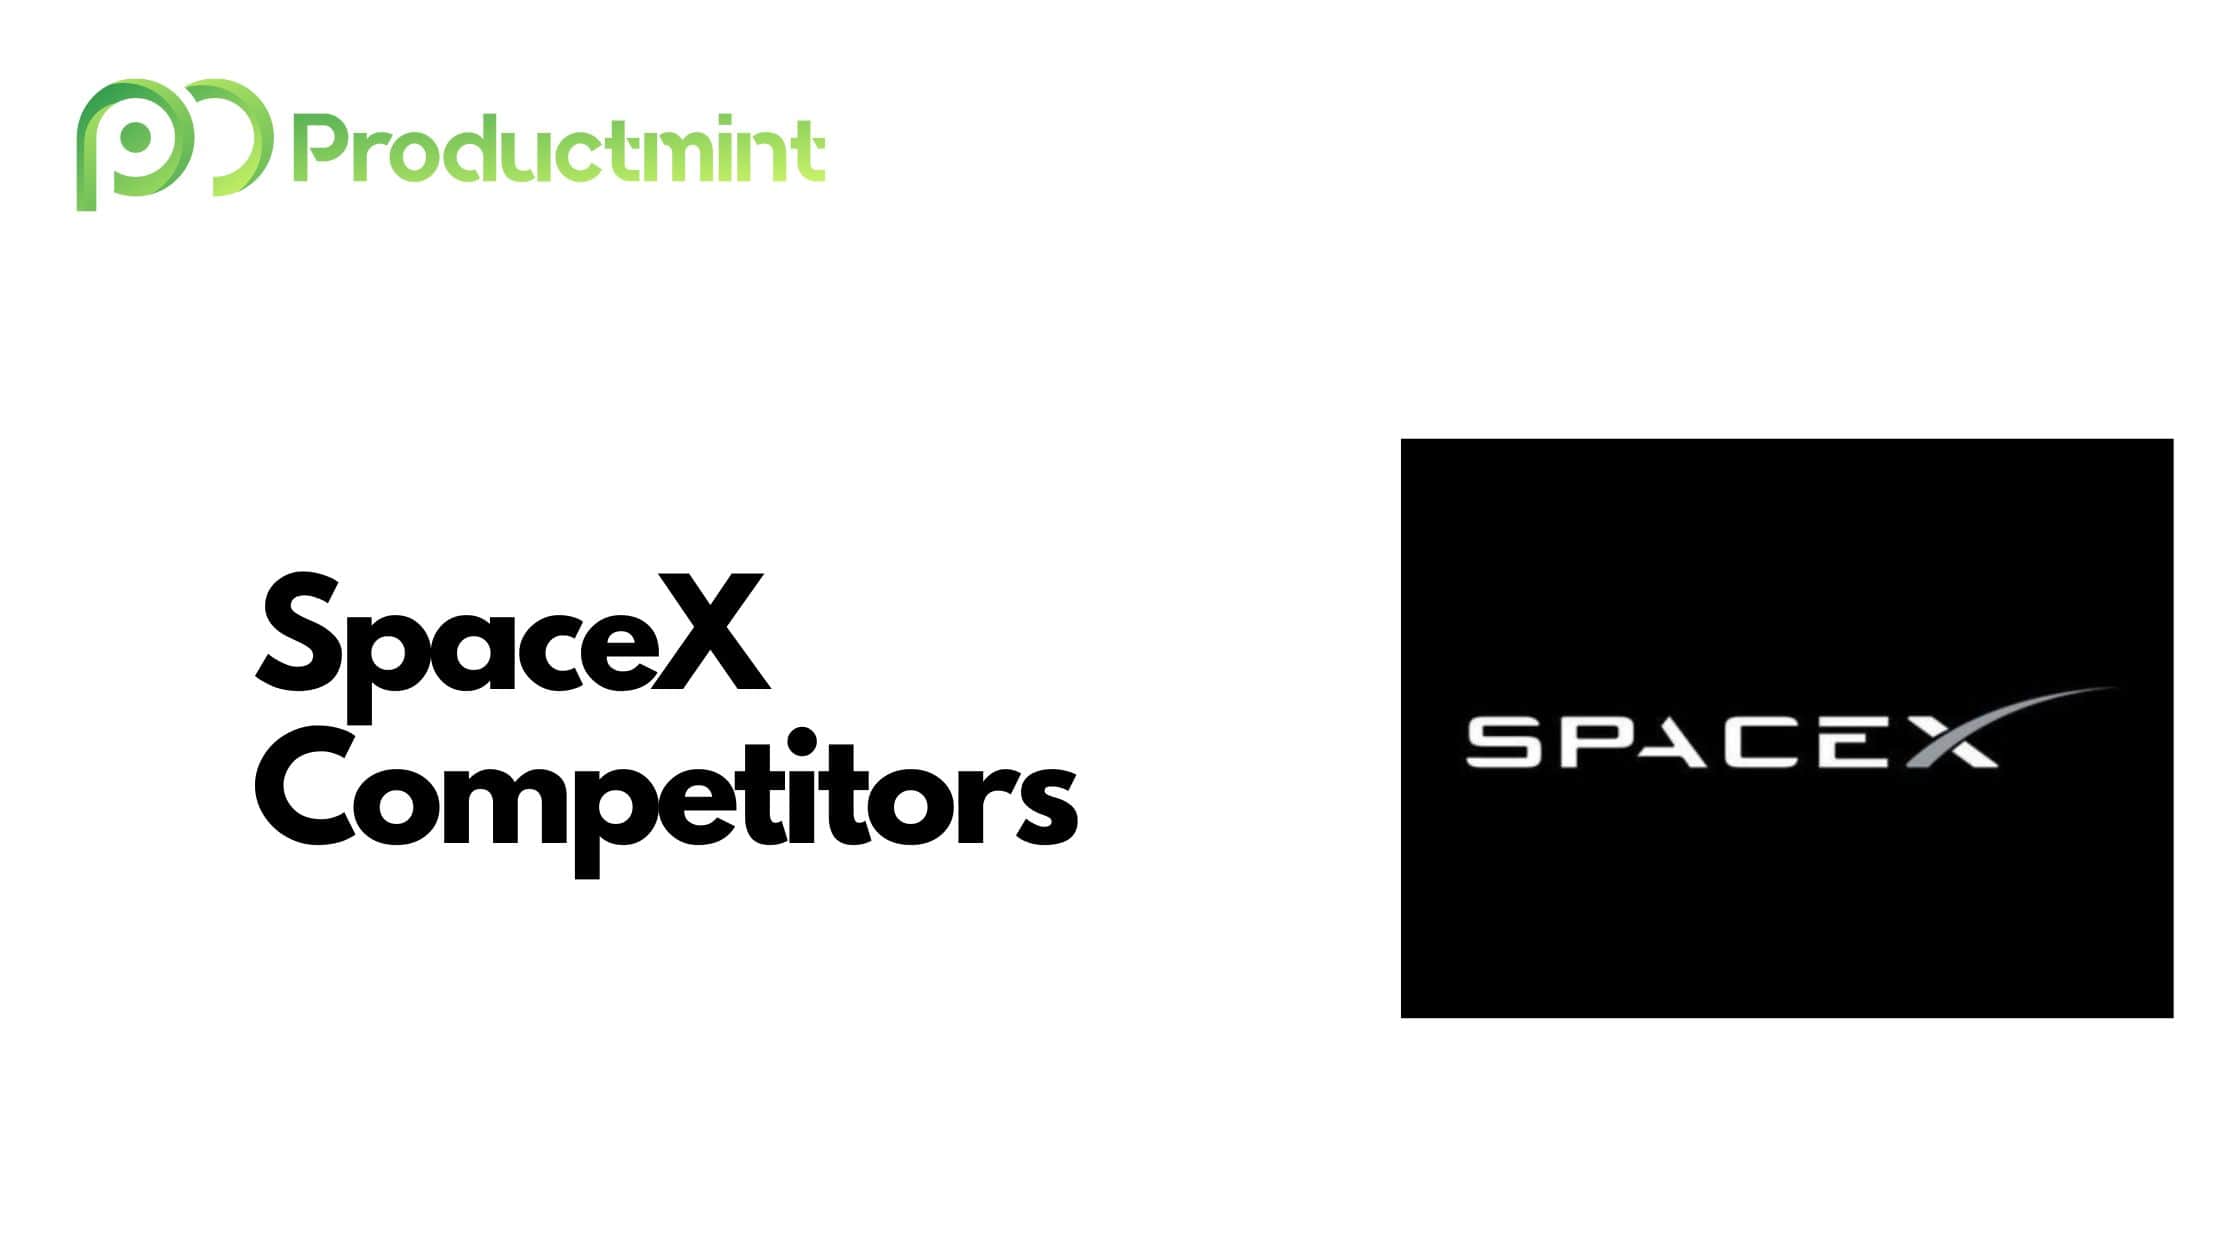 SpaceX Competitors